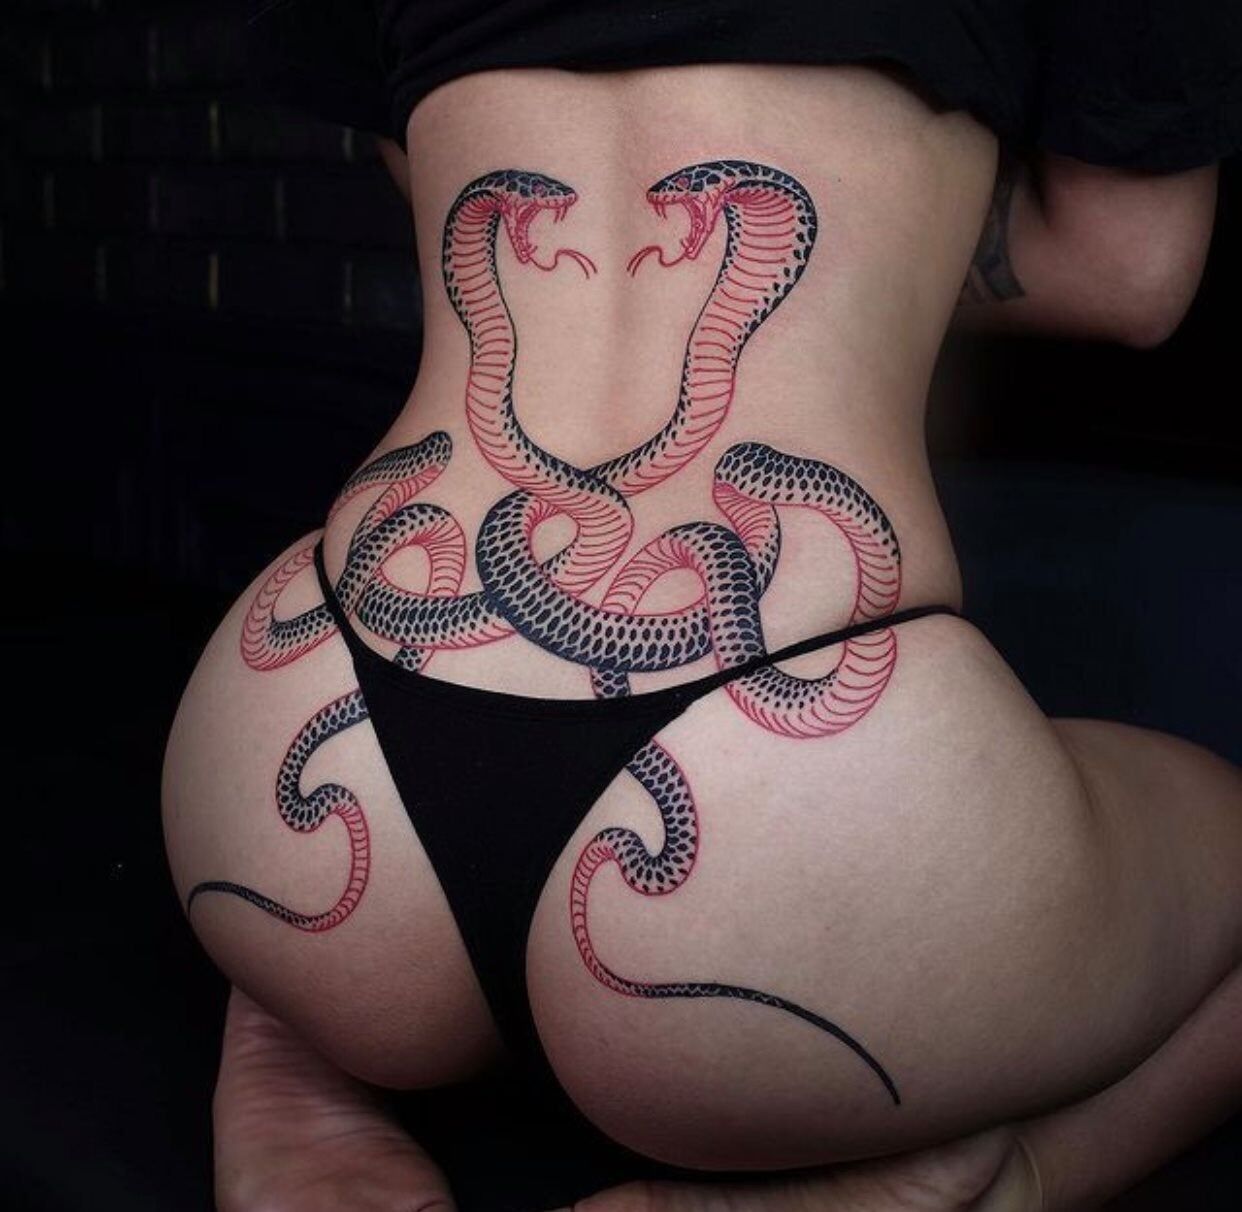 Snake tattoo by © BB Rung from Busan South Korea